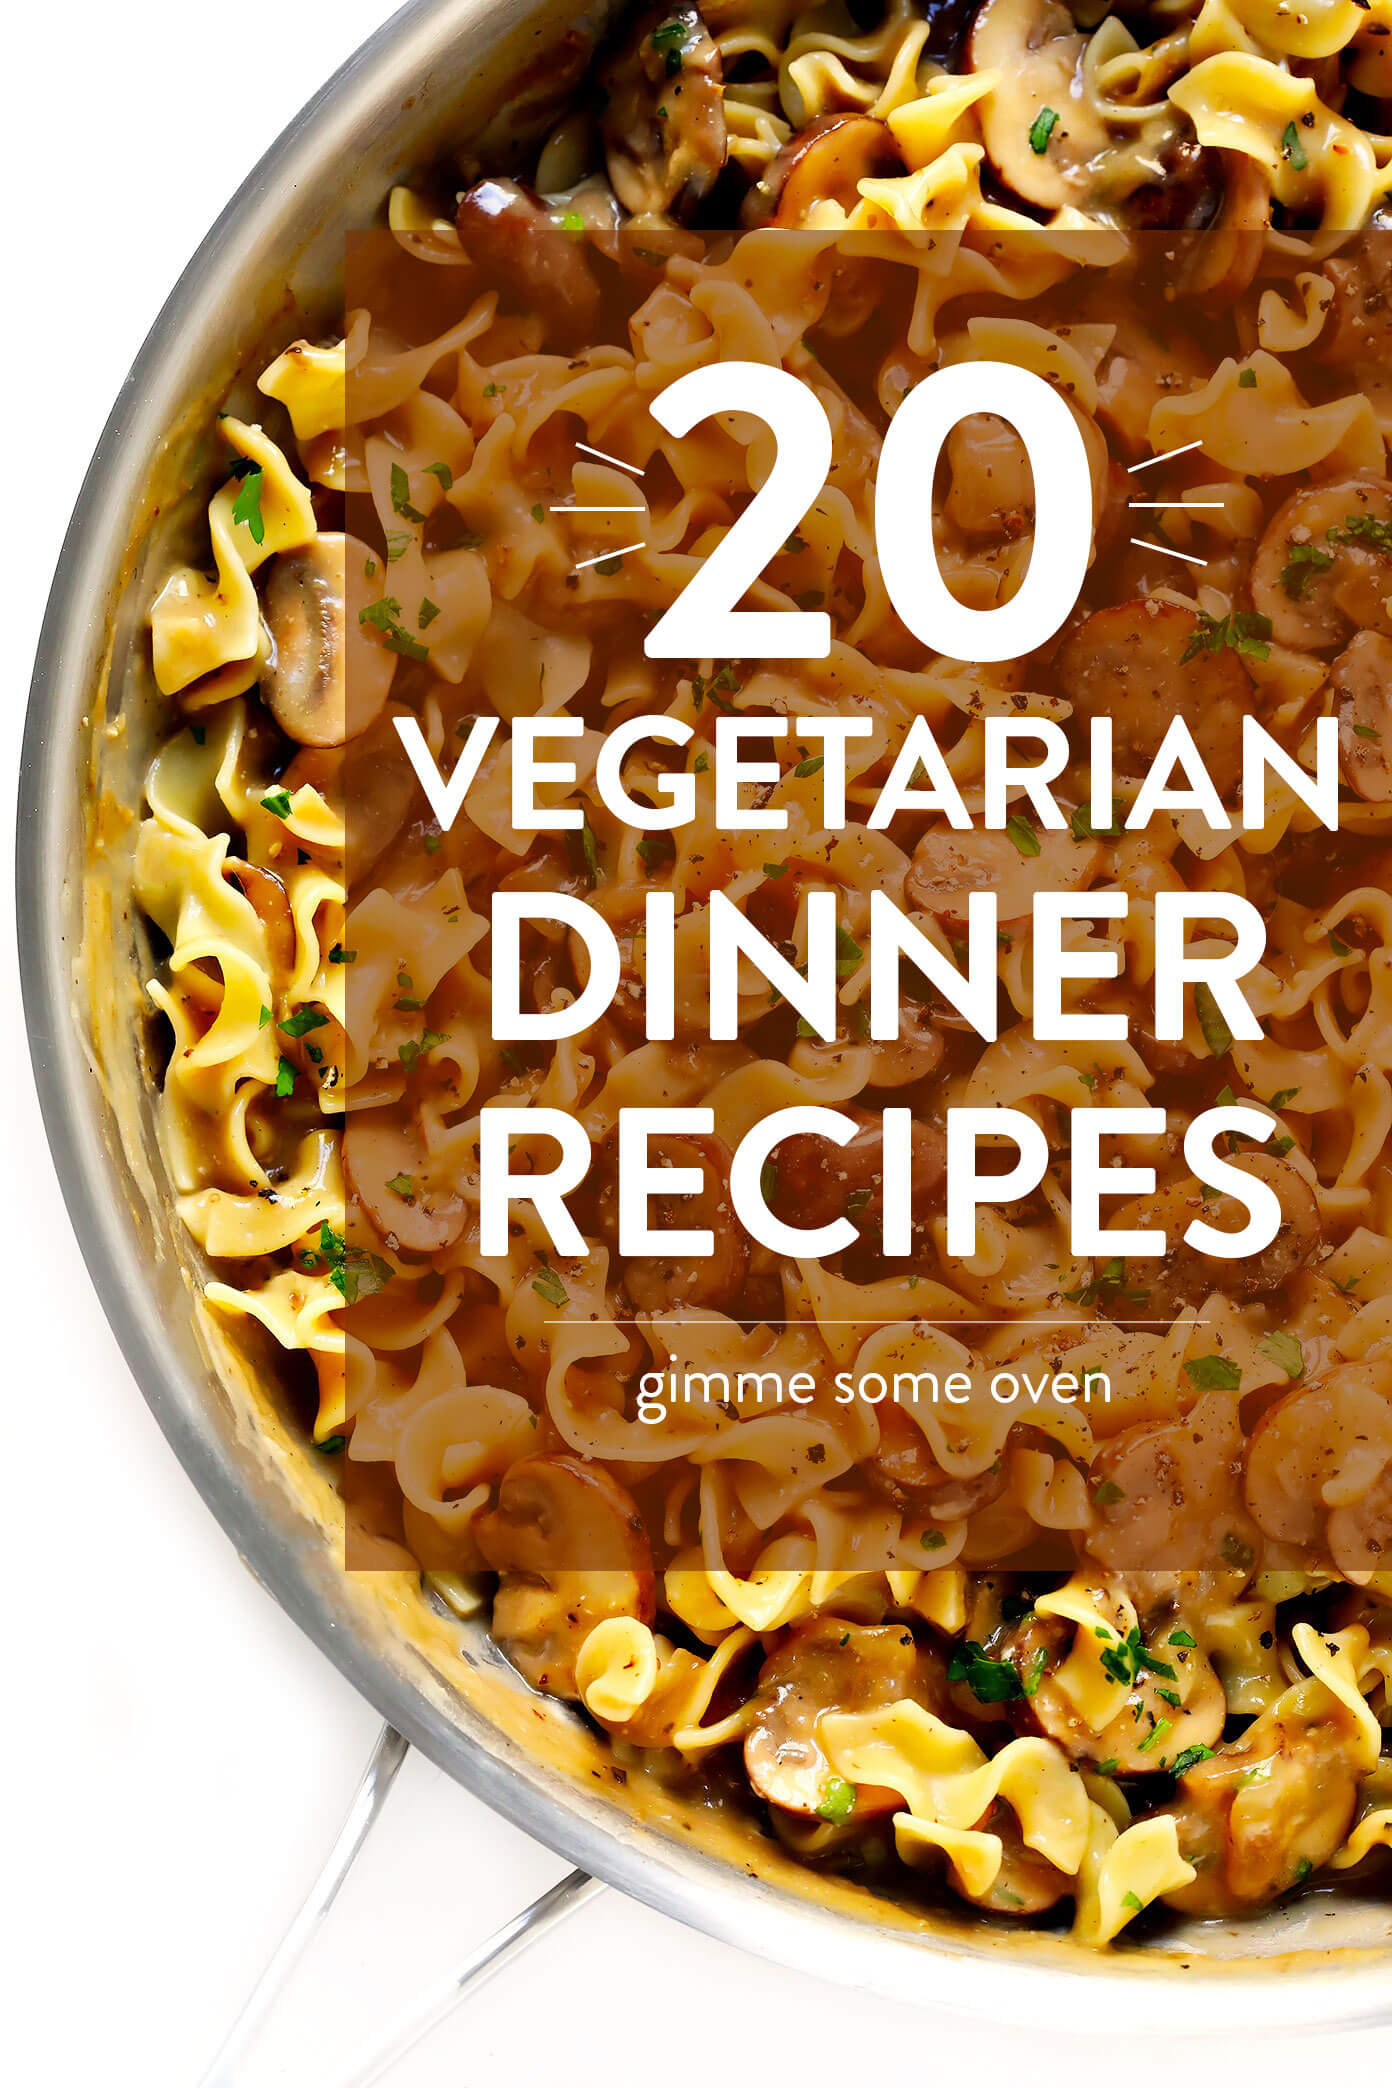 Easy Dinner Recipes Vegetarian
 20 Ve arian Dinner Recipes That Everyone Will LOVE